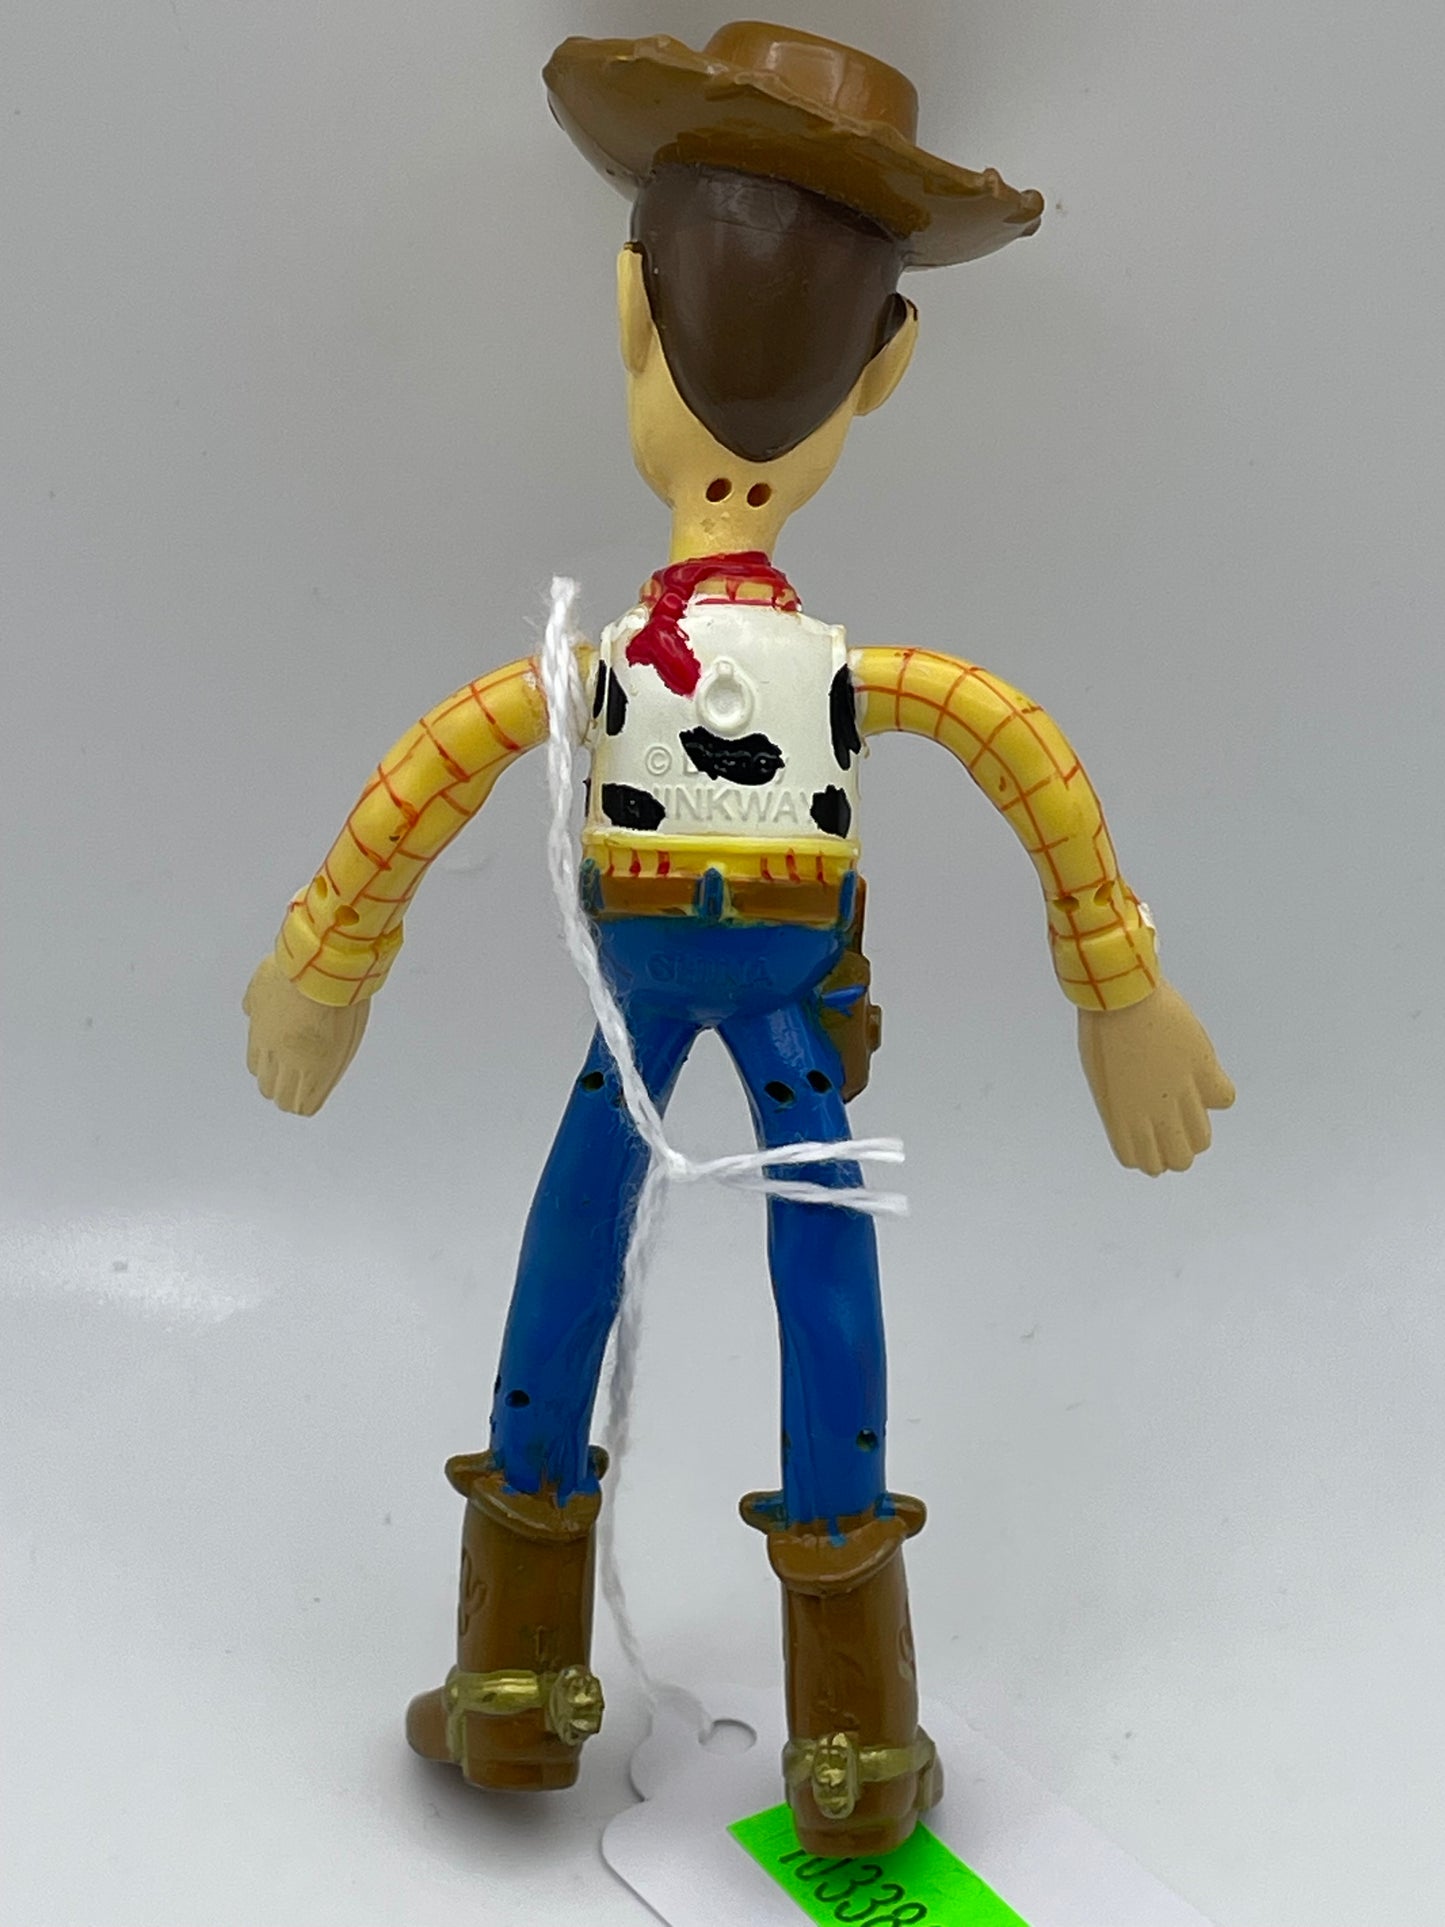 Toy Story - Thinkway Toy Woody #103389